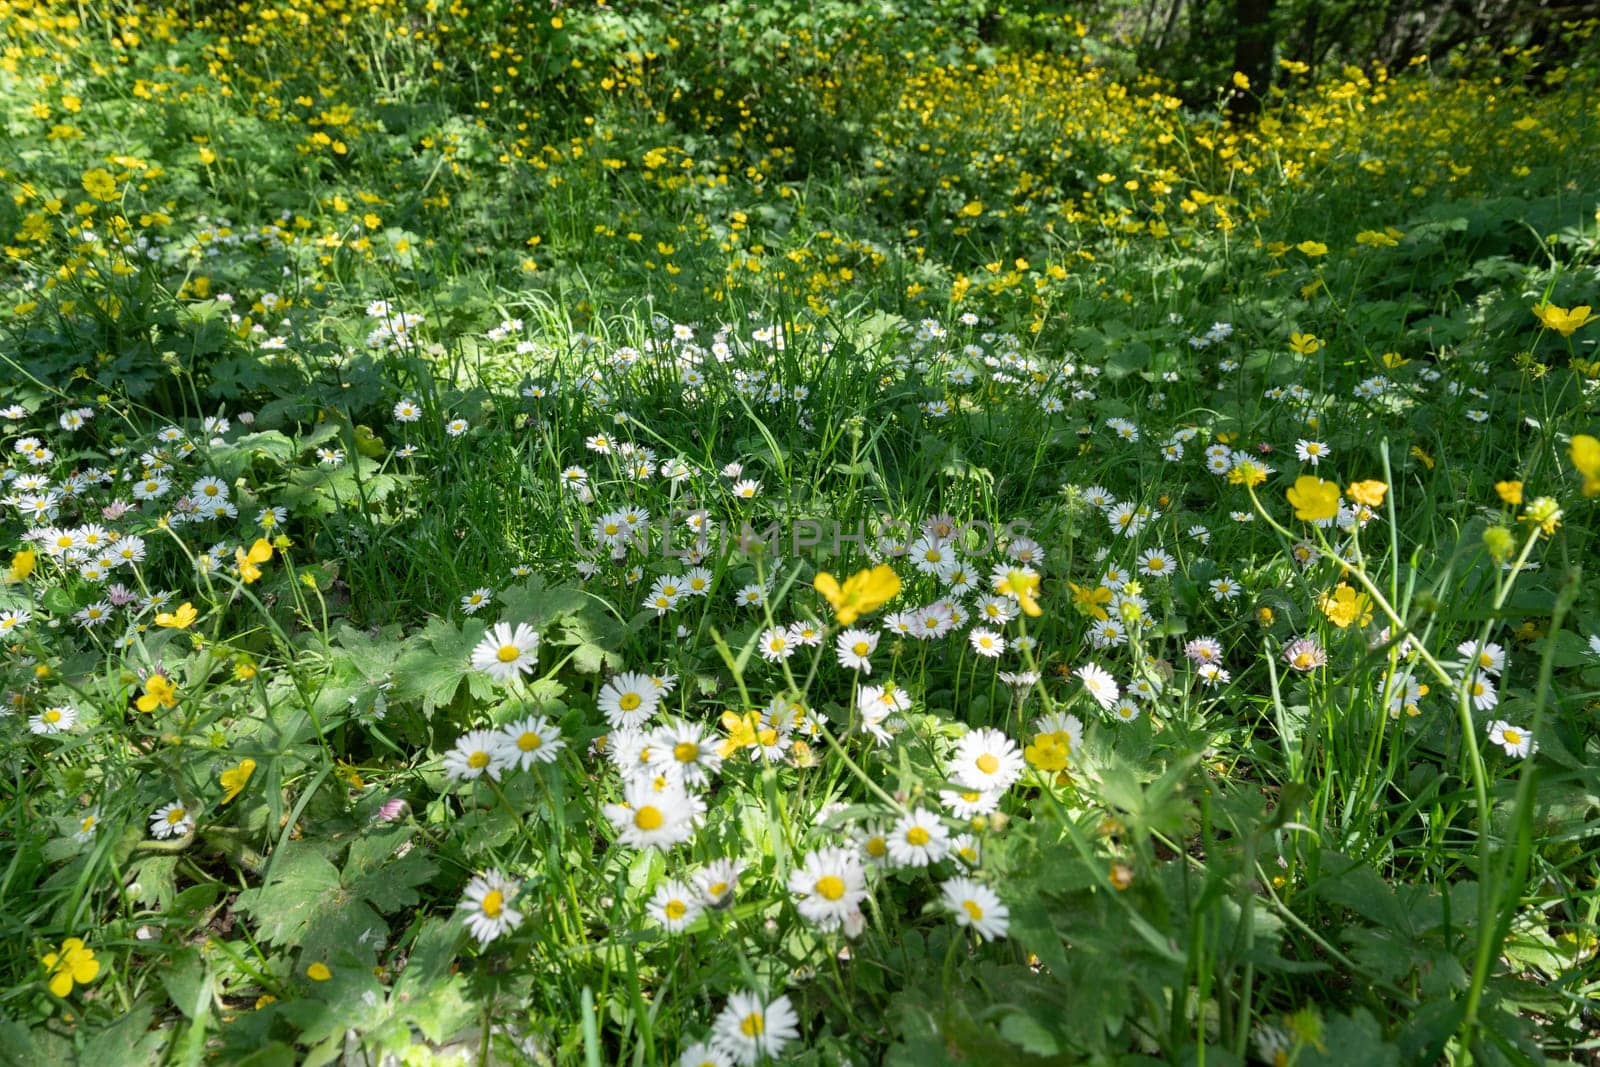 field of spring daisy flowers, natural background.